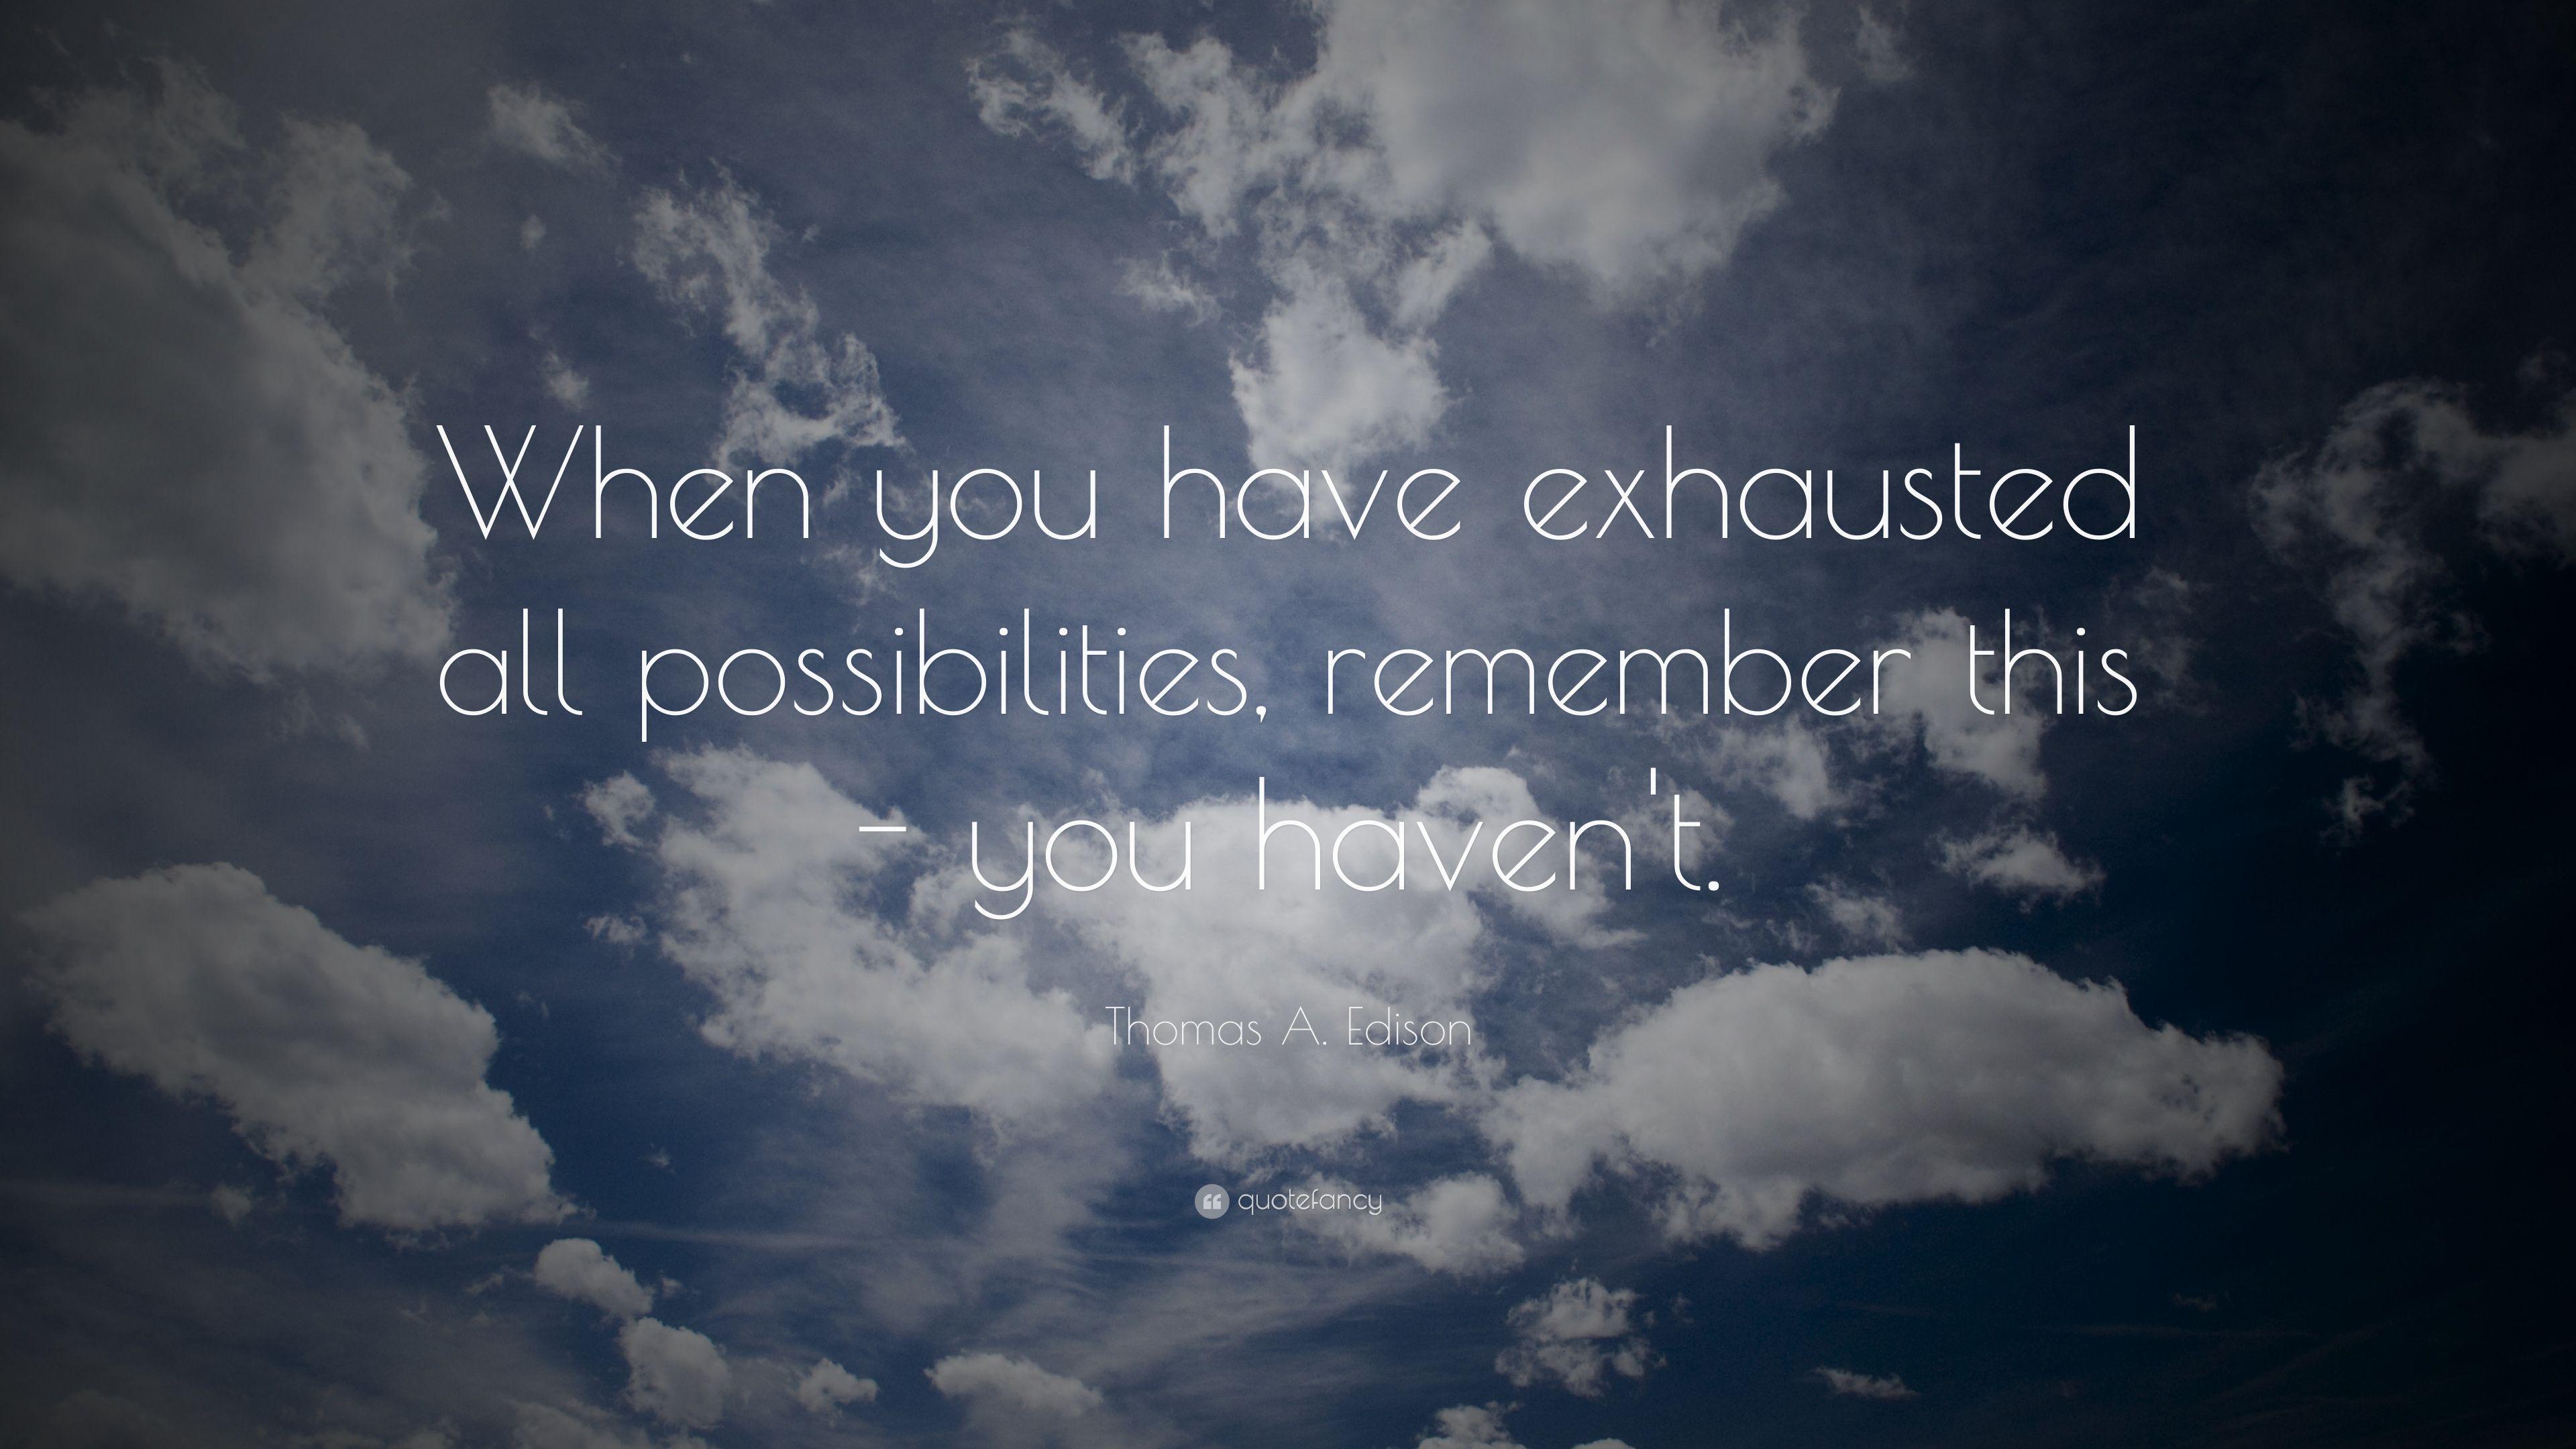 Thomas A. Edison Quote: “When you have exhausted all possibilities